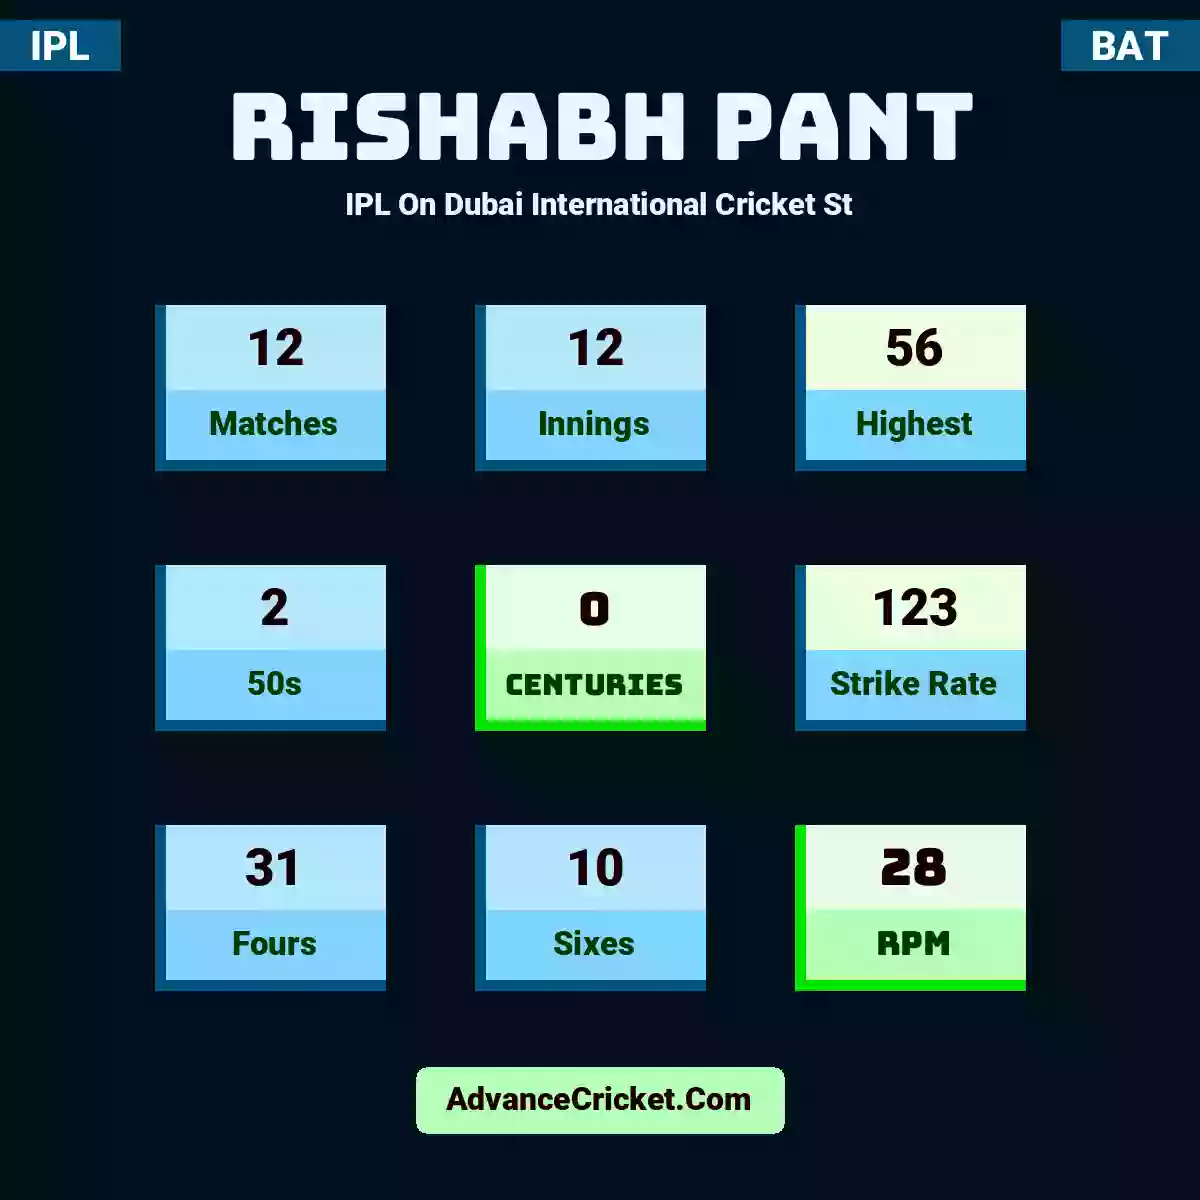 Rishabh Pant IPL  On Dubai International Cricket St, Rishabh Pant played 12 matches, scored 56 runs as highest, 2 half-centuries, and 0 centuries, with a strike rate of 123. R.Pant hit 31 fours and 10 sixes, with an RPM of 28.